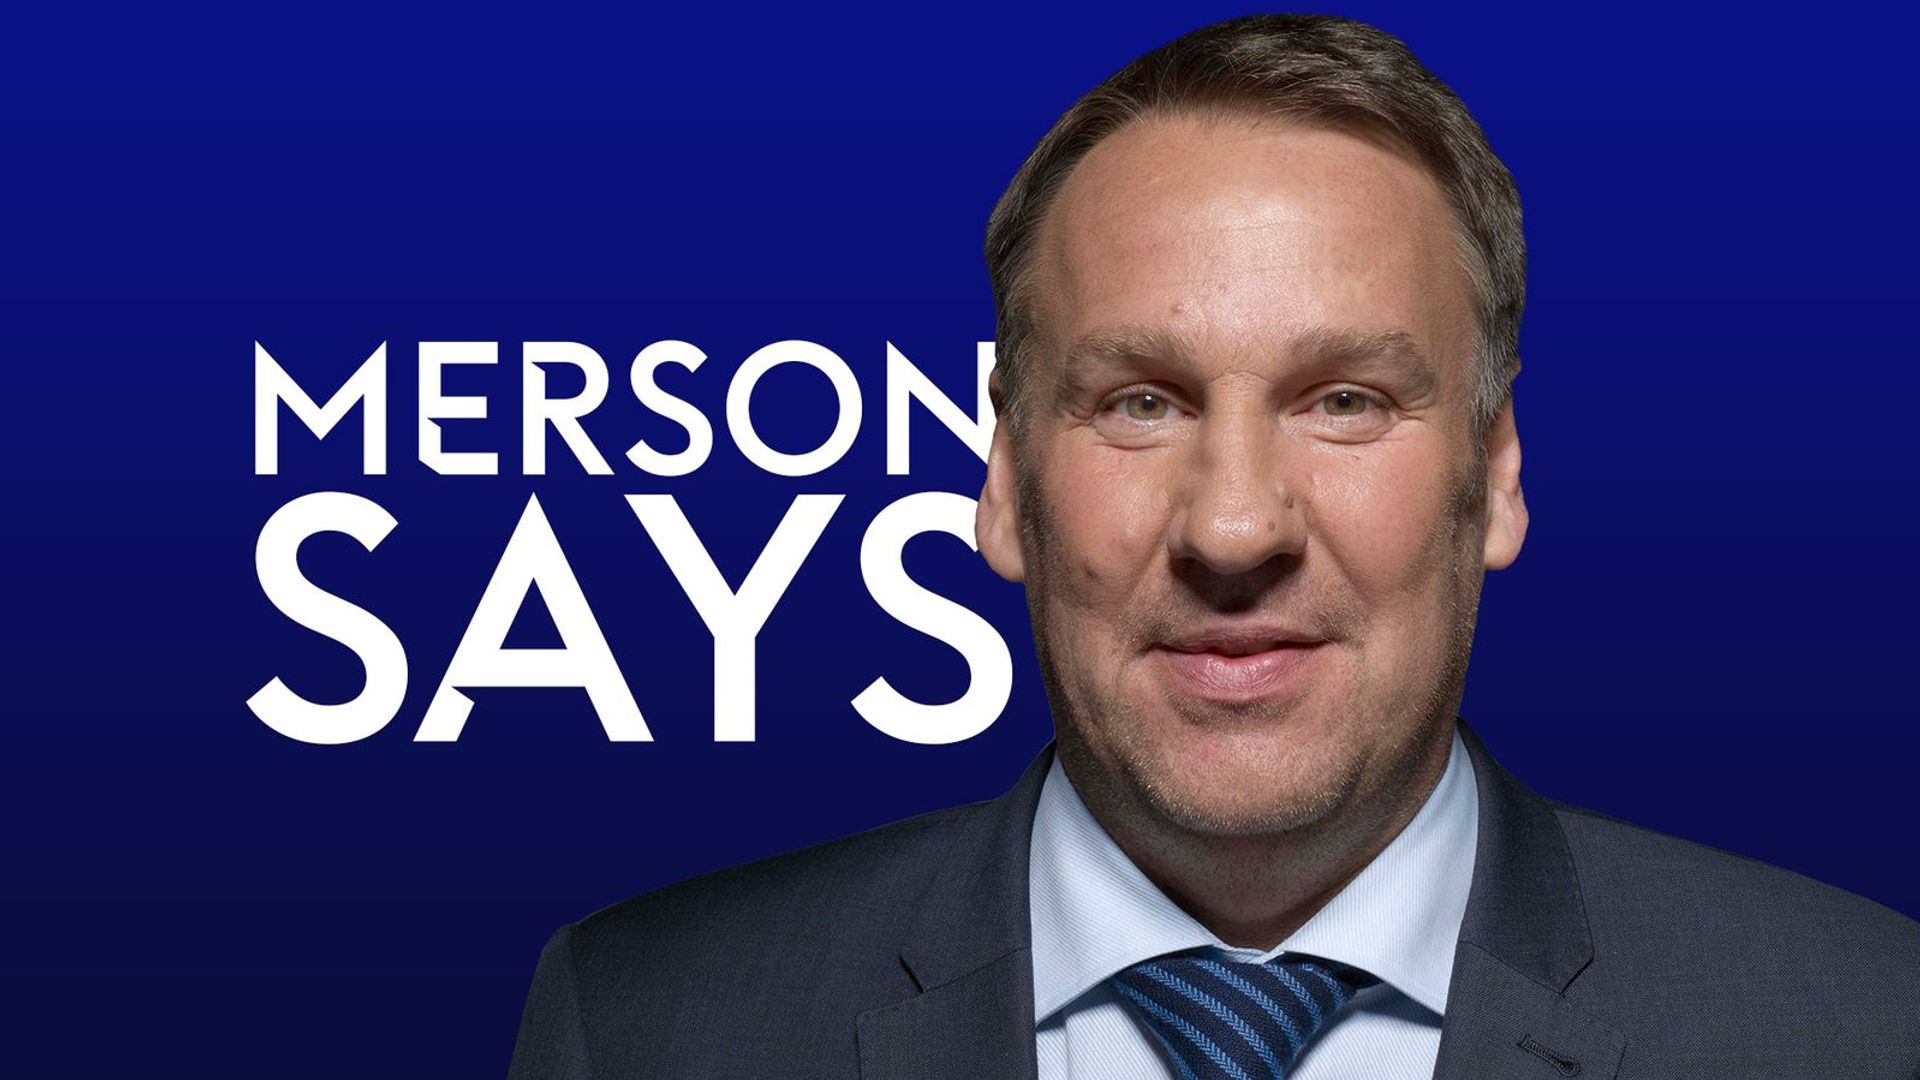 Merson Says: Mount deserves respect | Conte 'explosion' waiting to happen